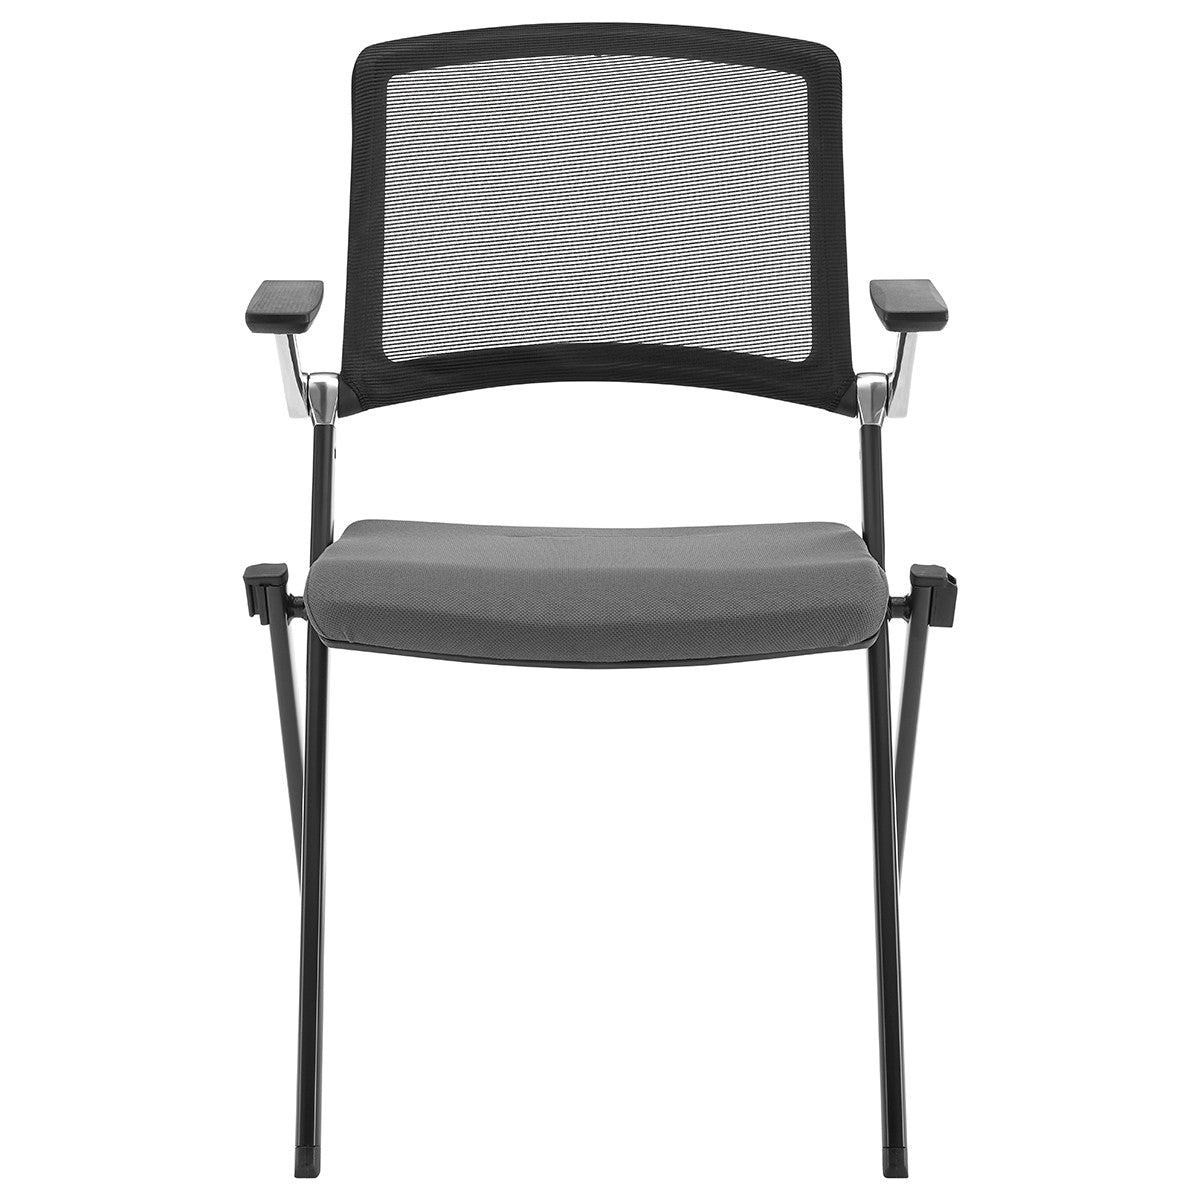 Set-Of-Two-Gray-Polyester-Blend-Seat-Swivel-Task-Chair-Mesh-Back-Steel-Frame-Office-Chairs